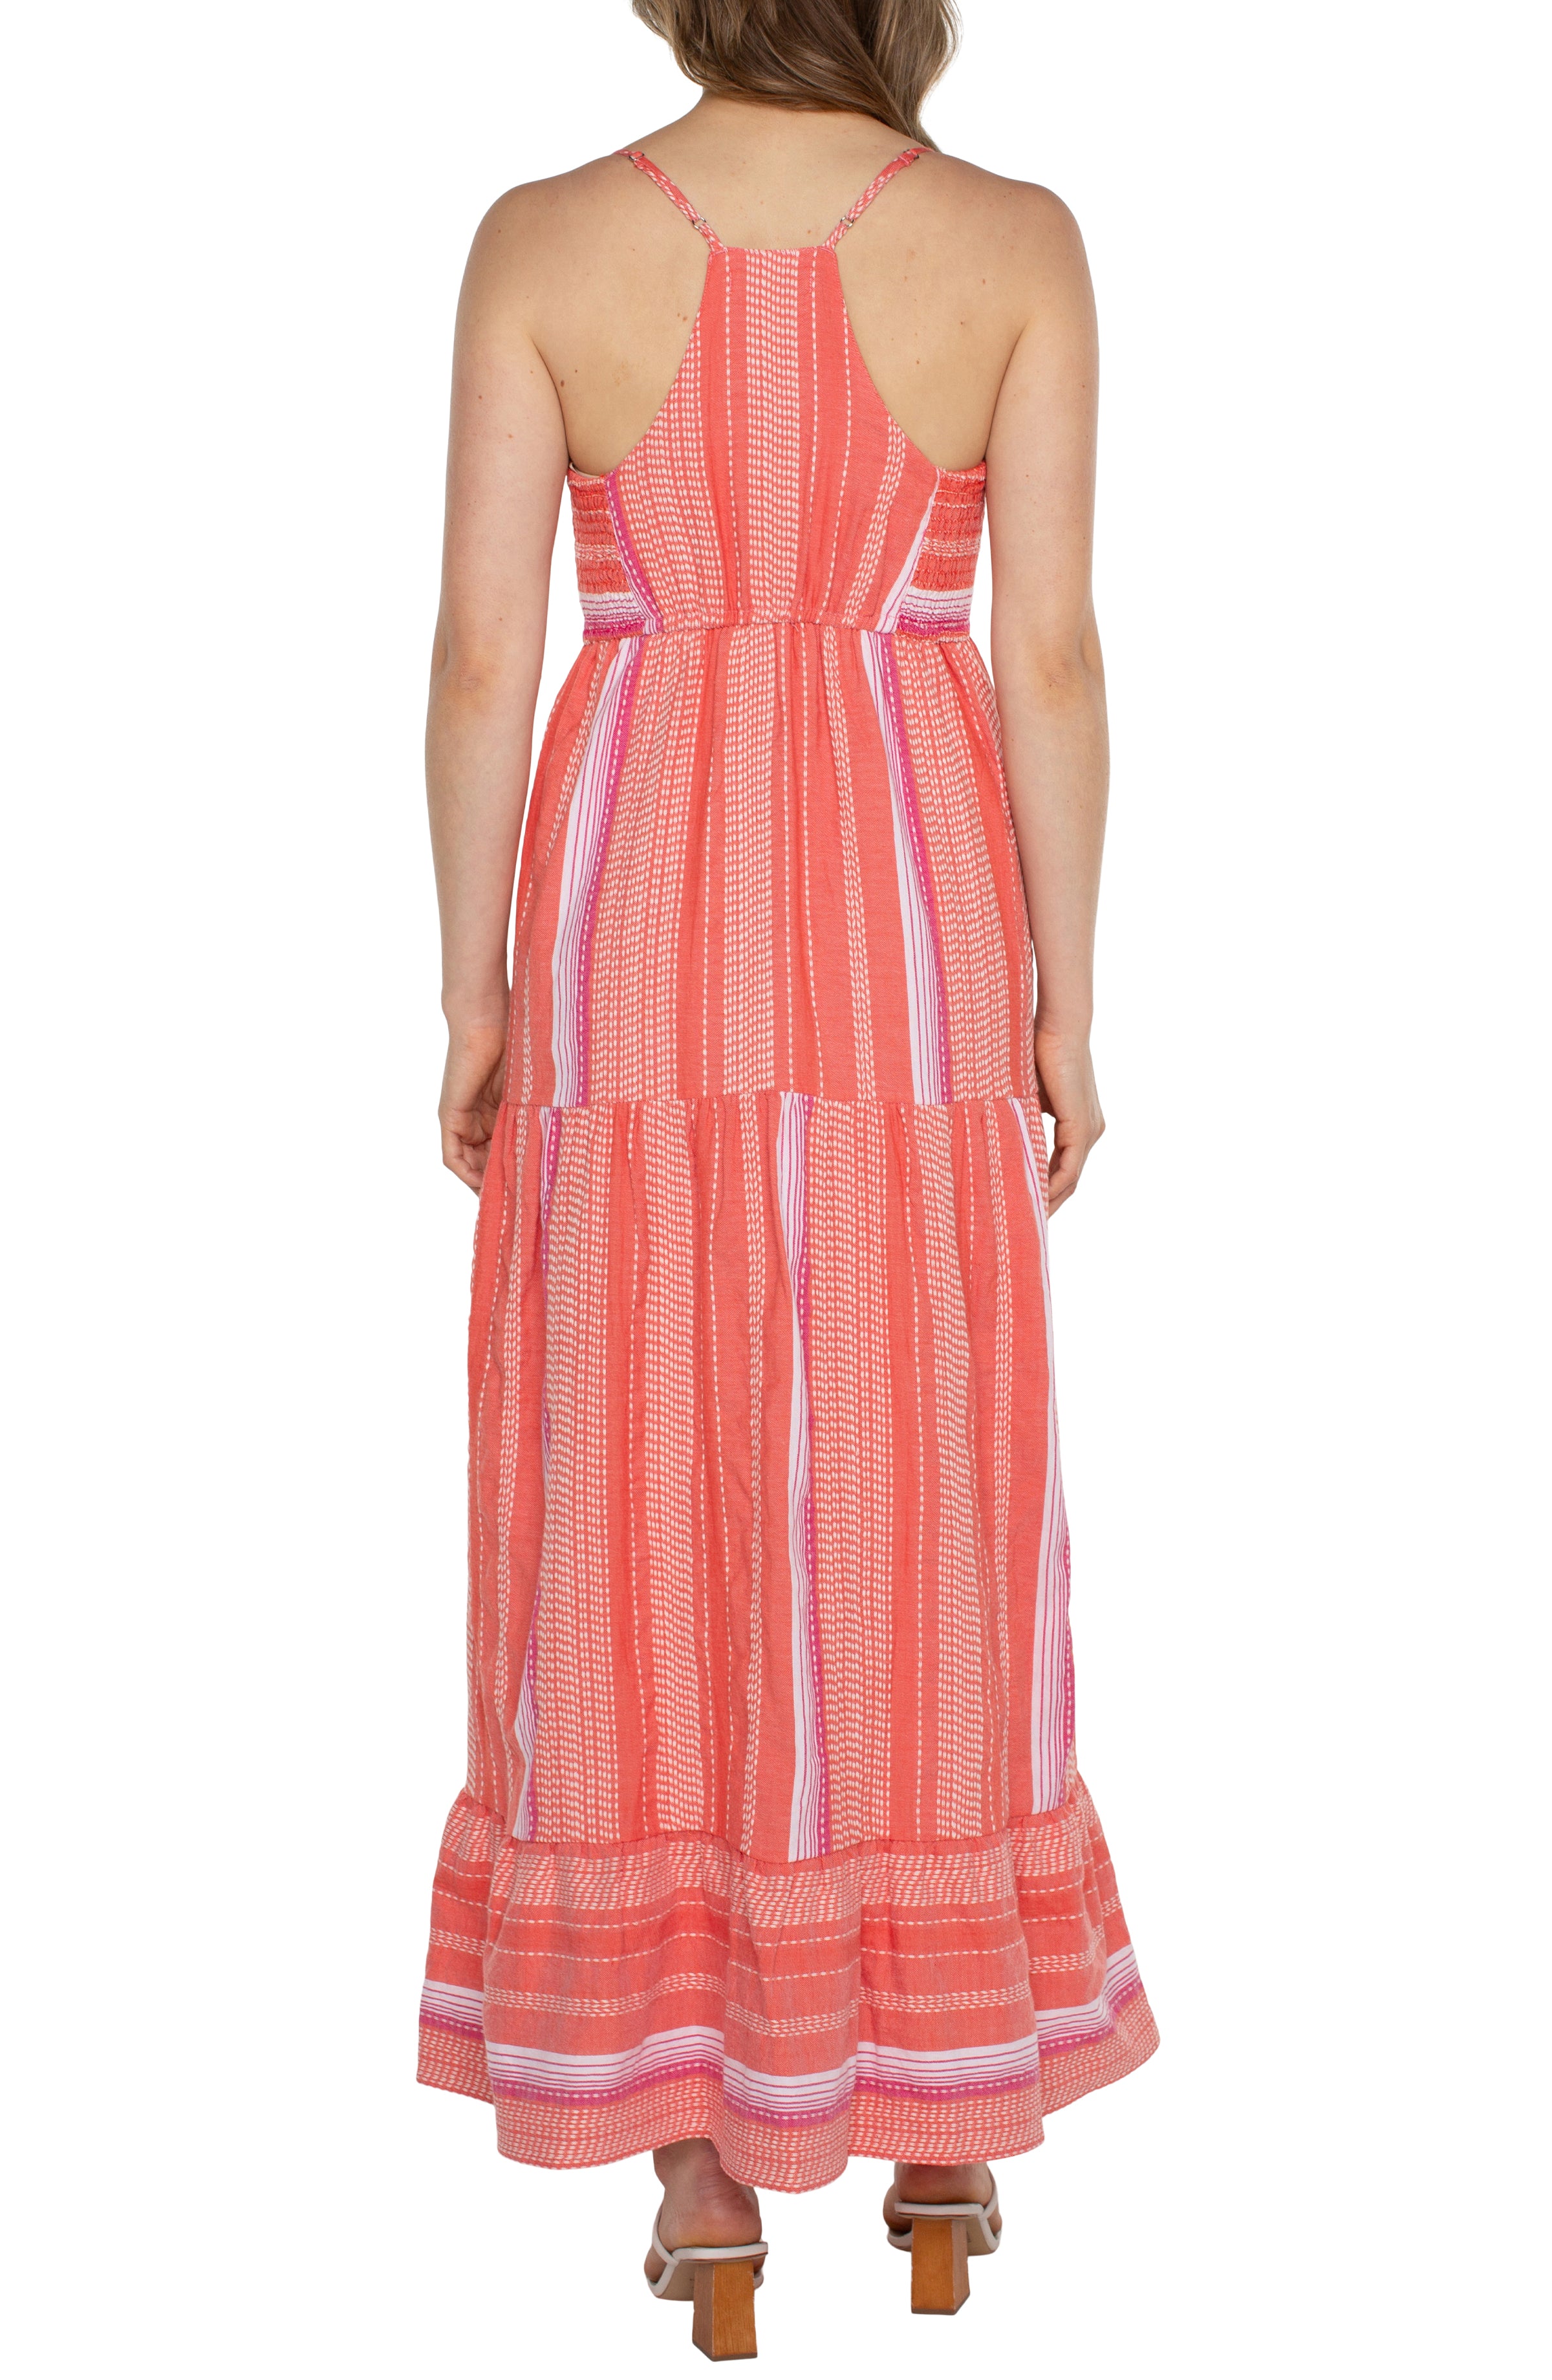 LVP Racer Back Tiered Maxi Dress - Coral Multi Back View